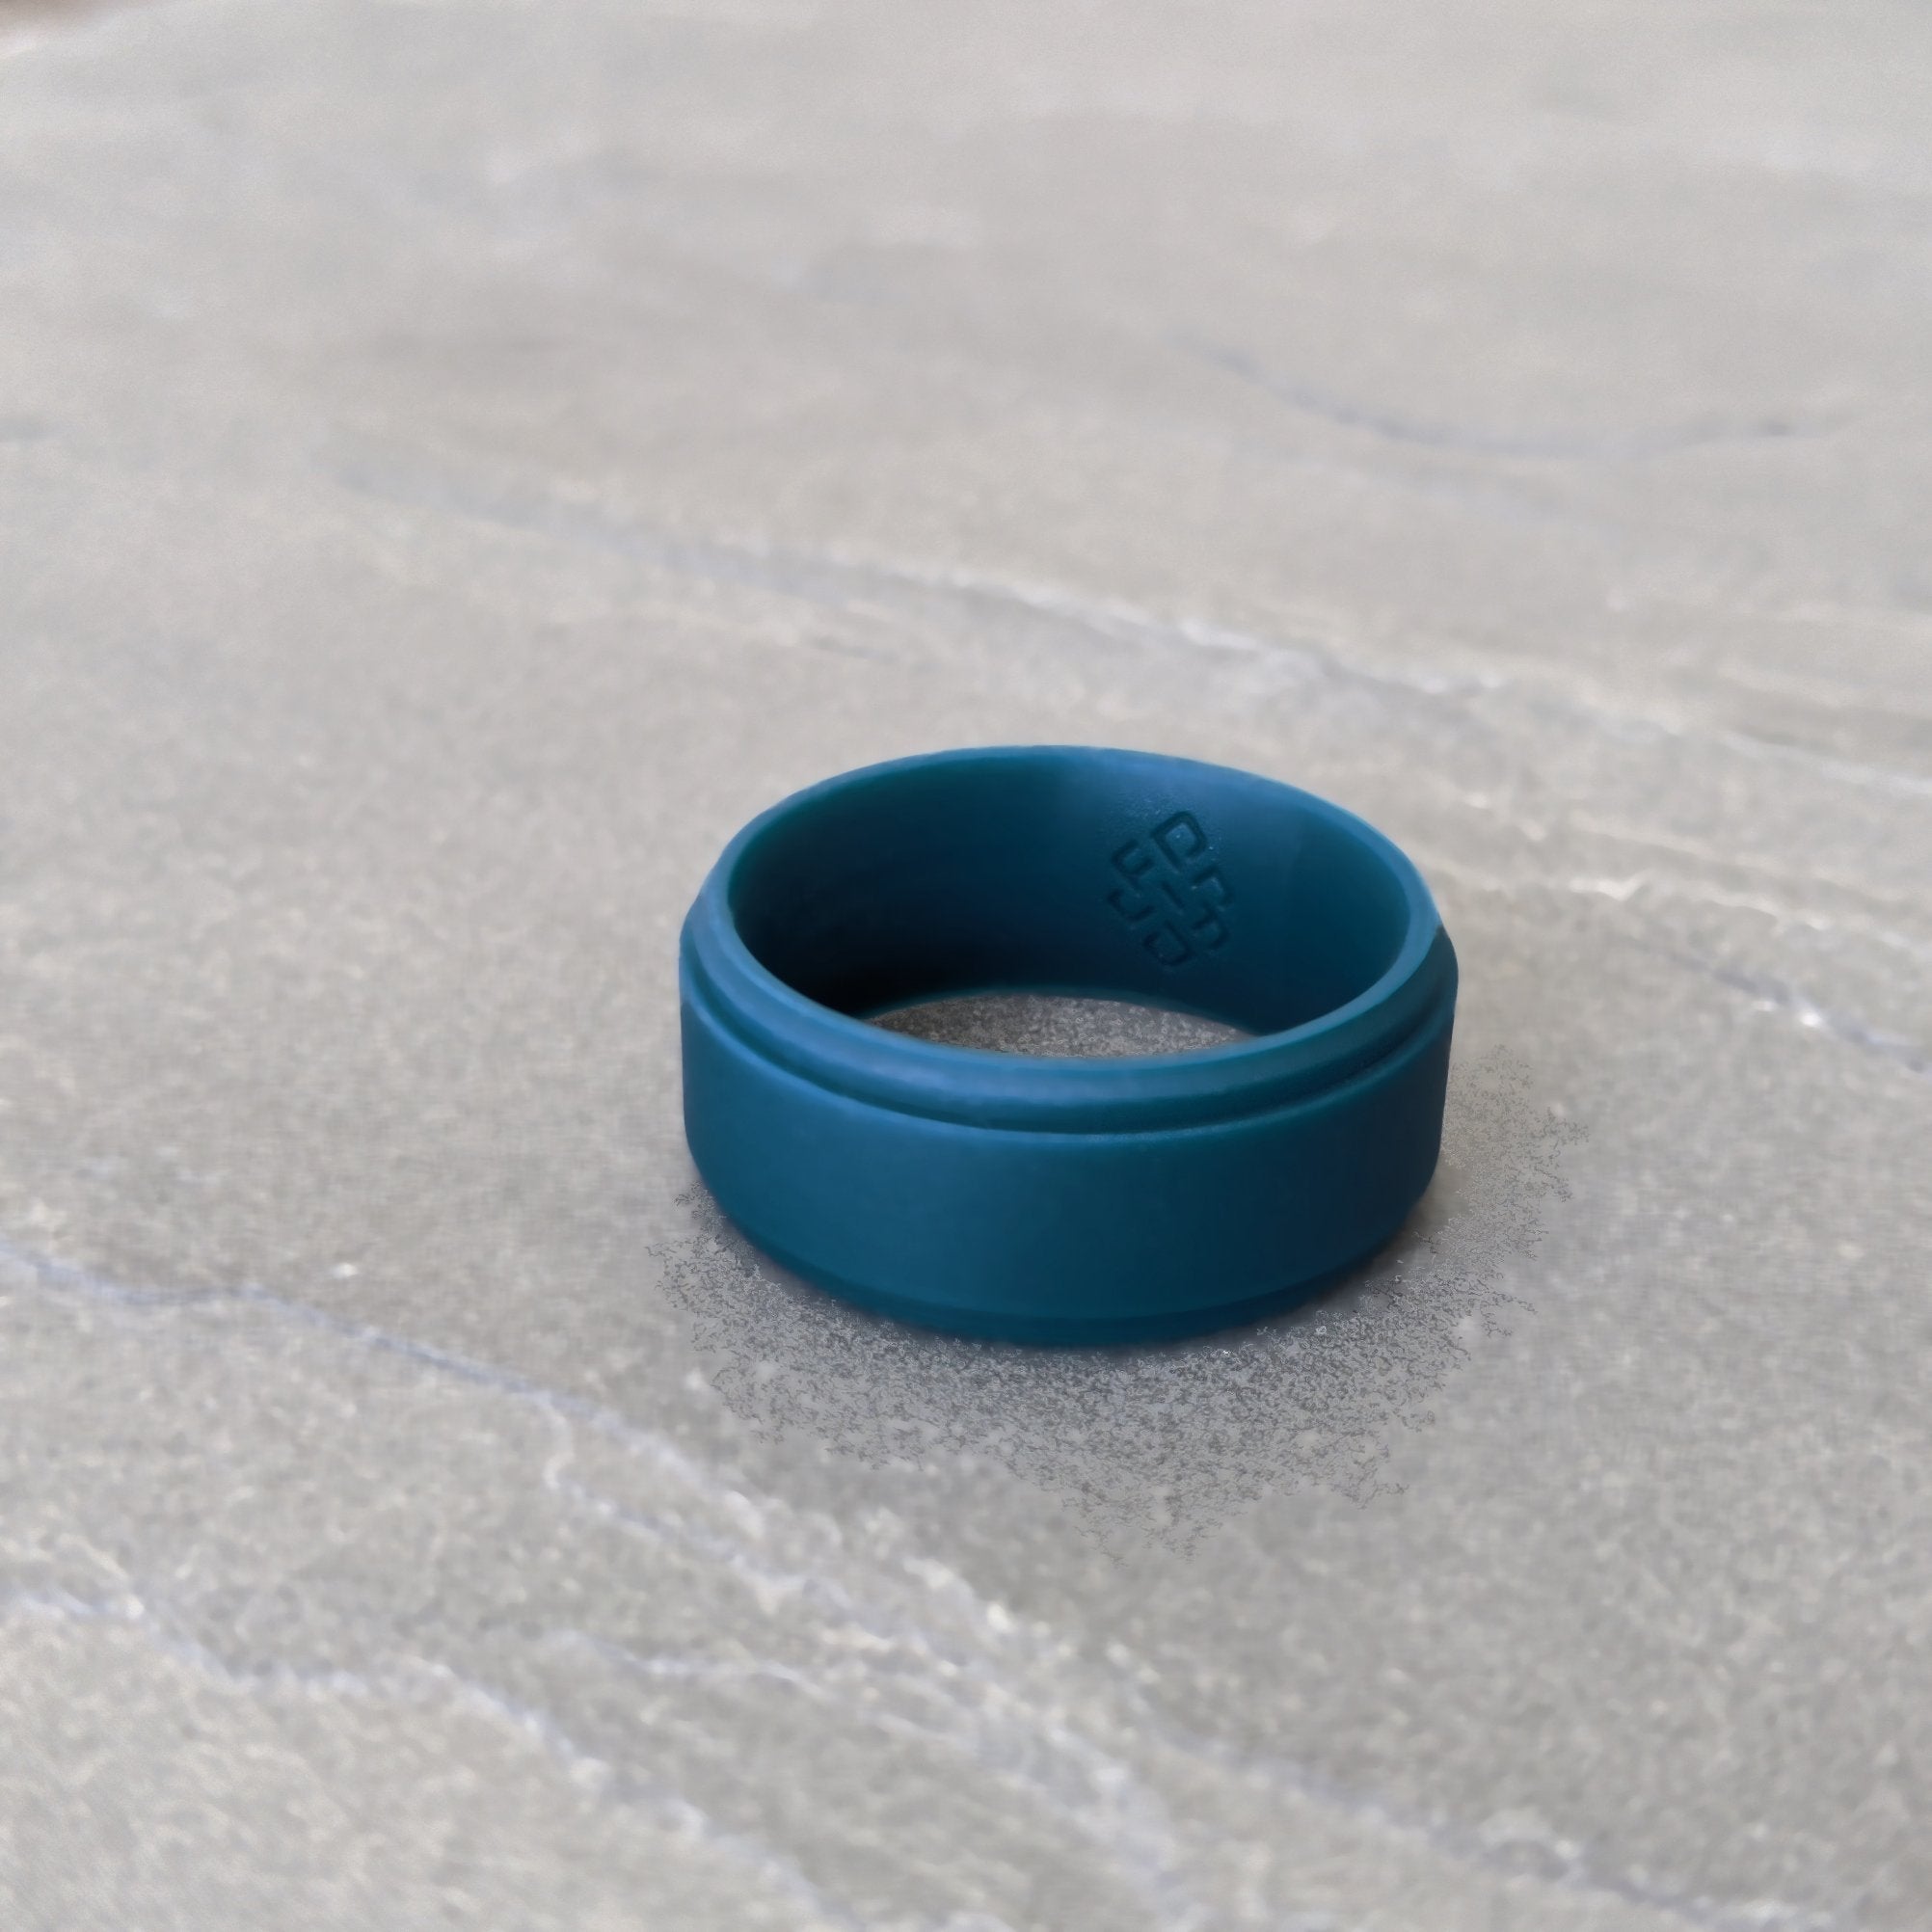 Teal Step Edge Breathable Silicone Ring for Men - Knot Theory